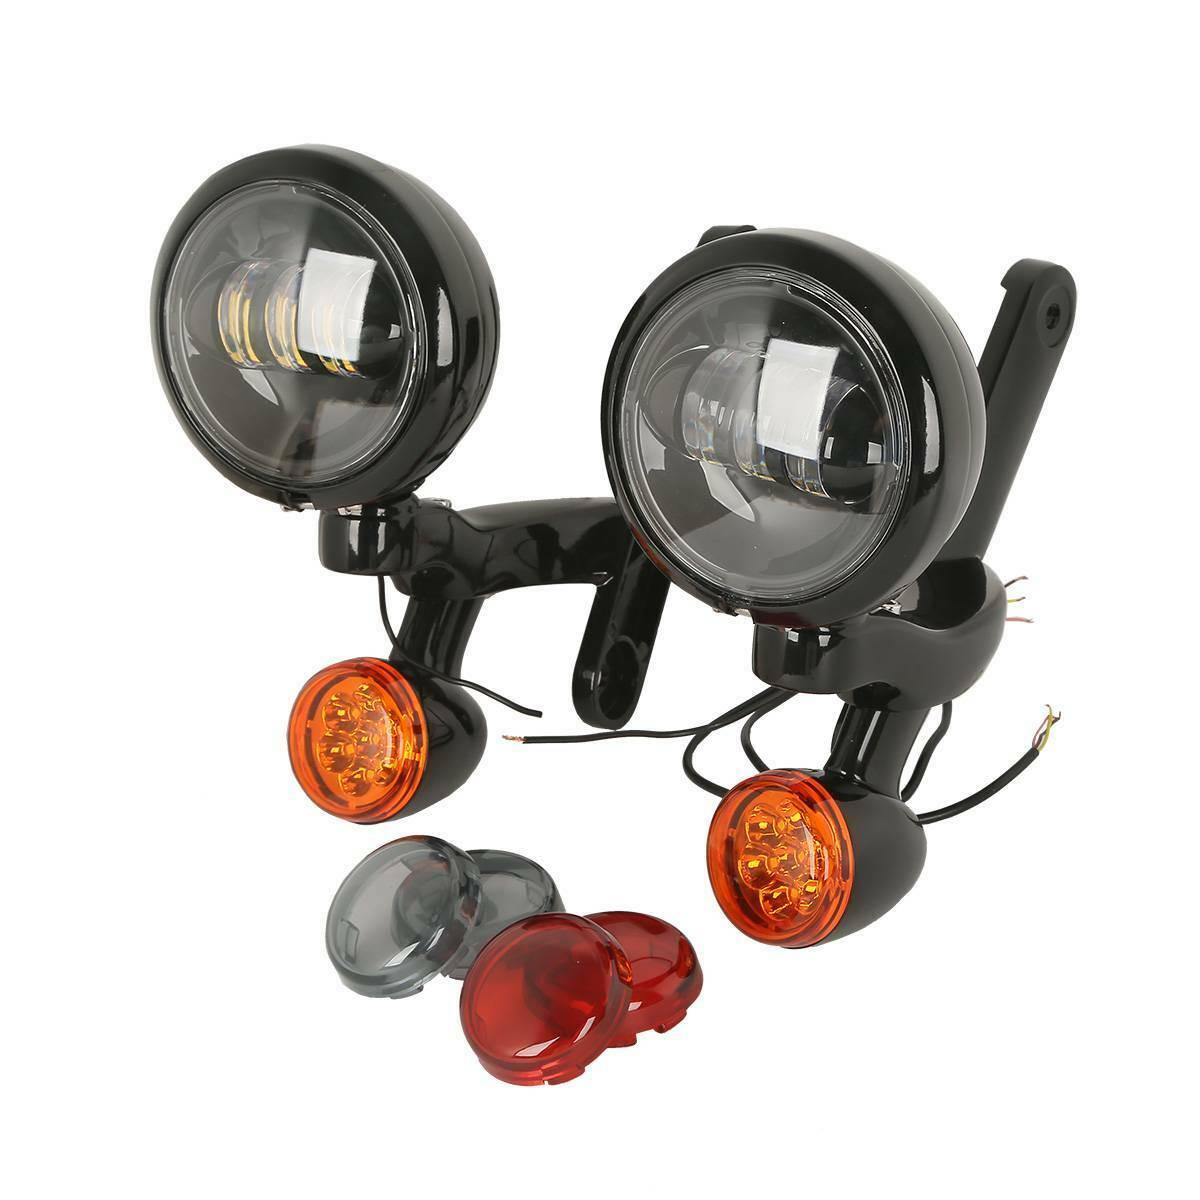 4-1/2" LED Auxiliary Lighting Spot Fog Light For Harley Electra Tri Glide 94-22 - Moto Life Products